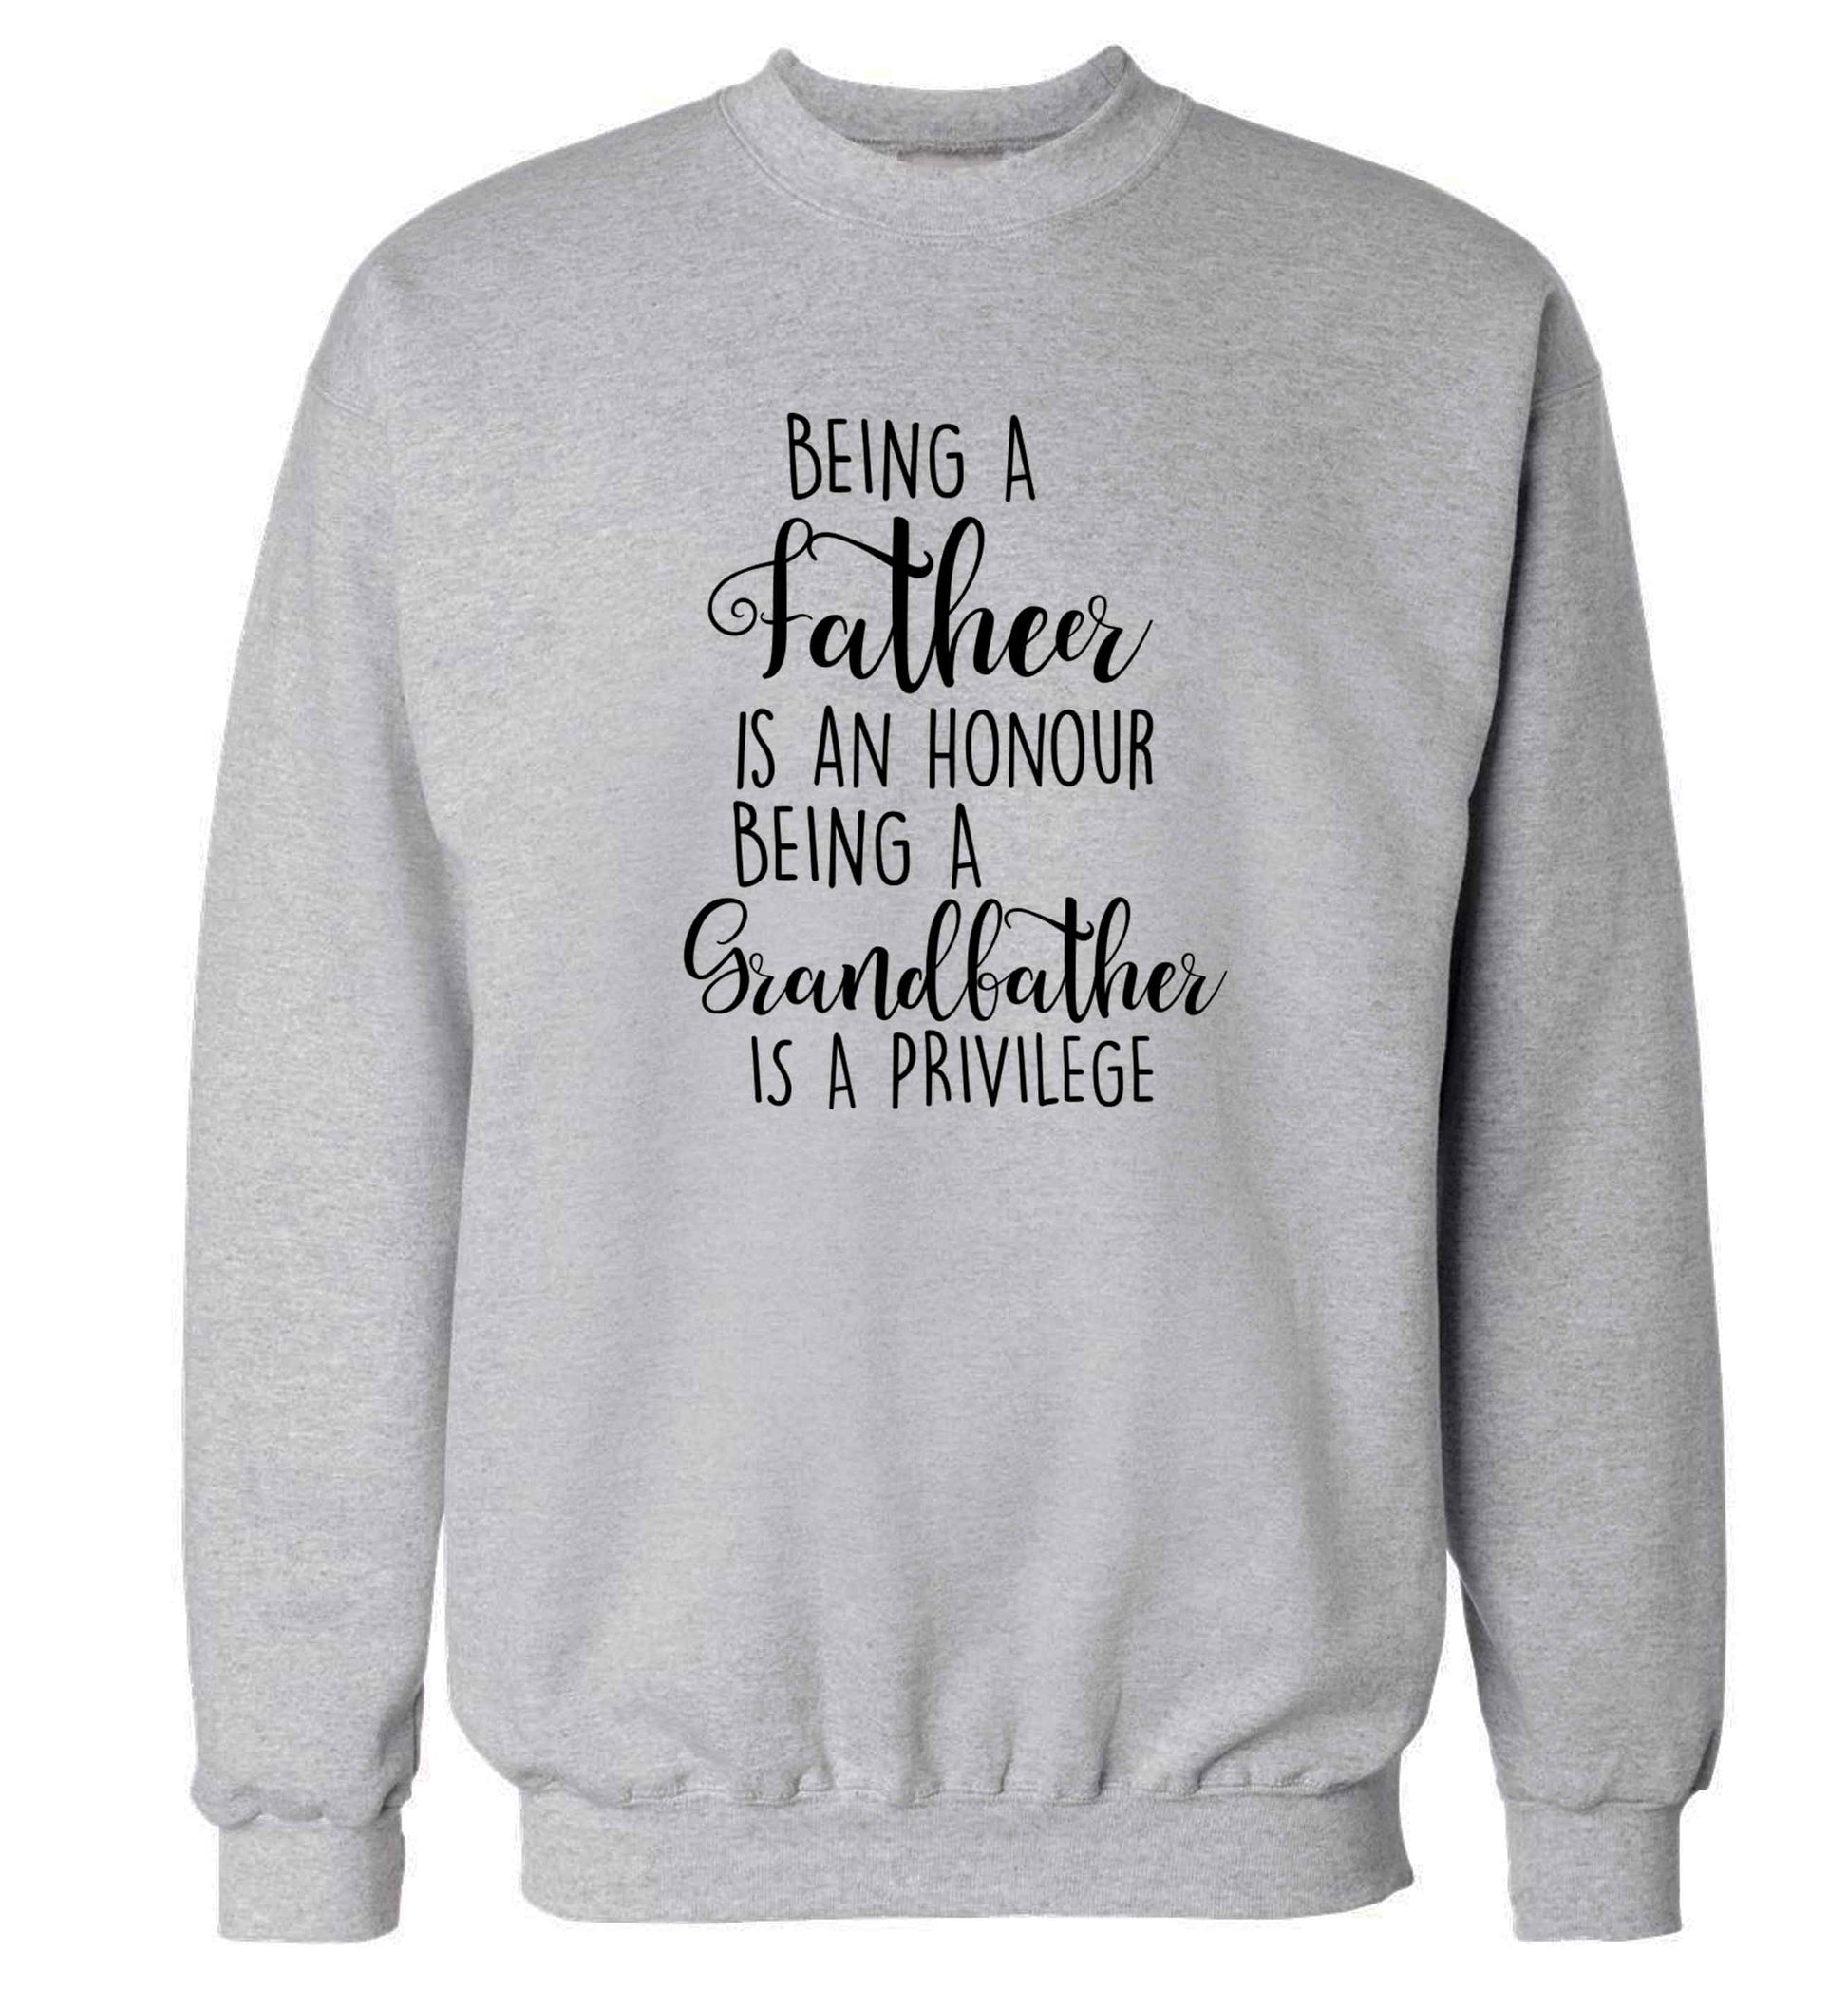 Being a father is an honour being a grandfather is a privilege Adult's unisex grey Sweater 2XL